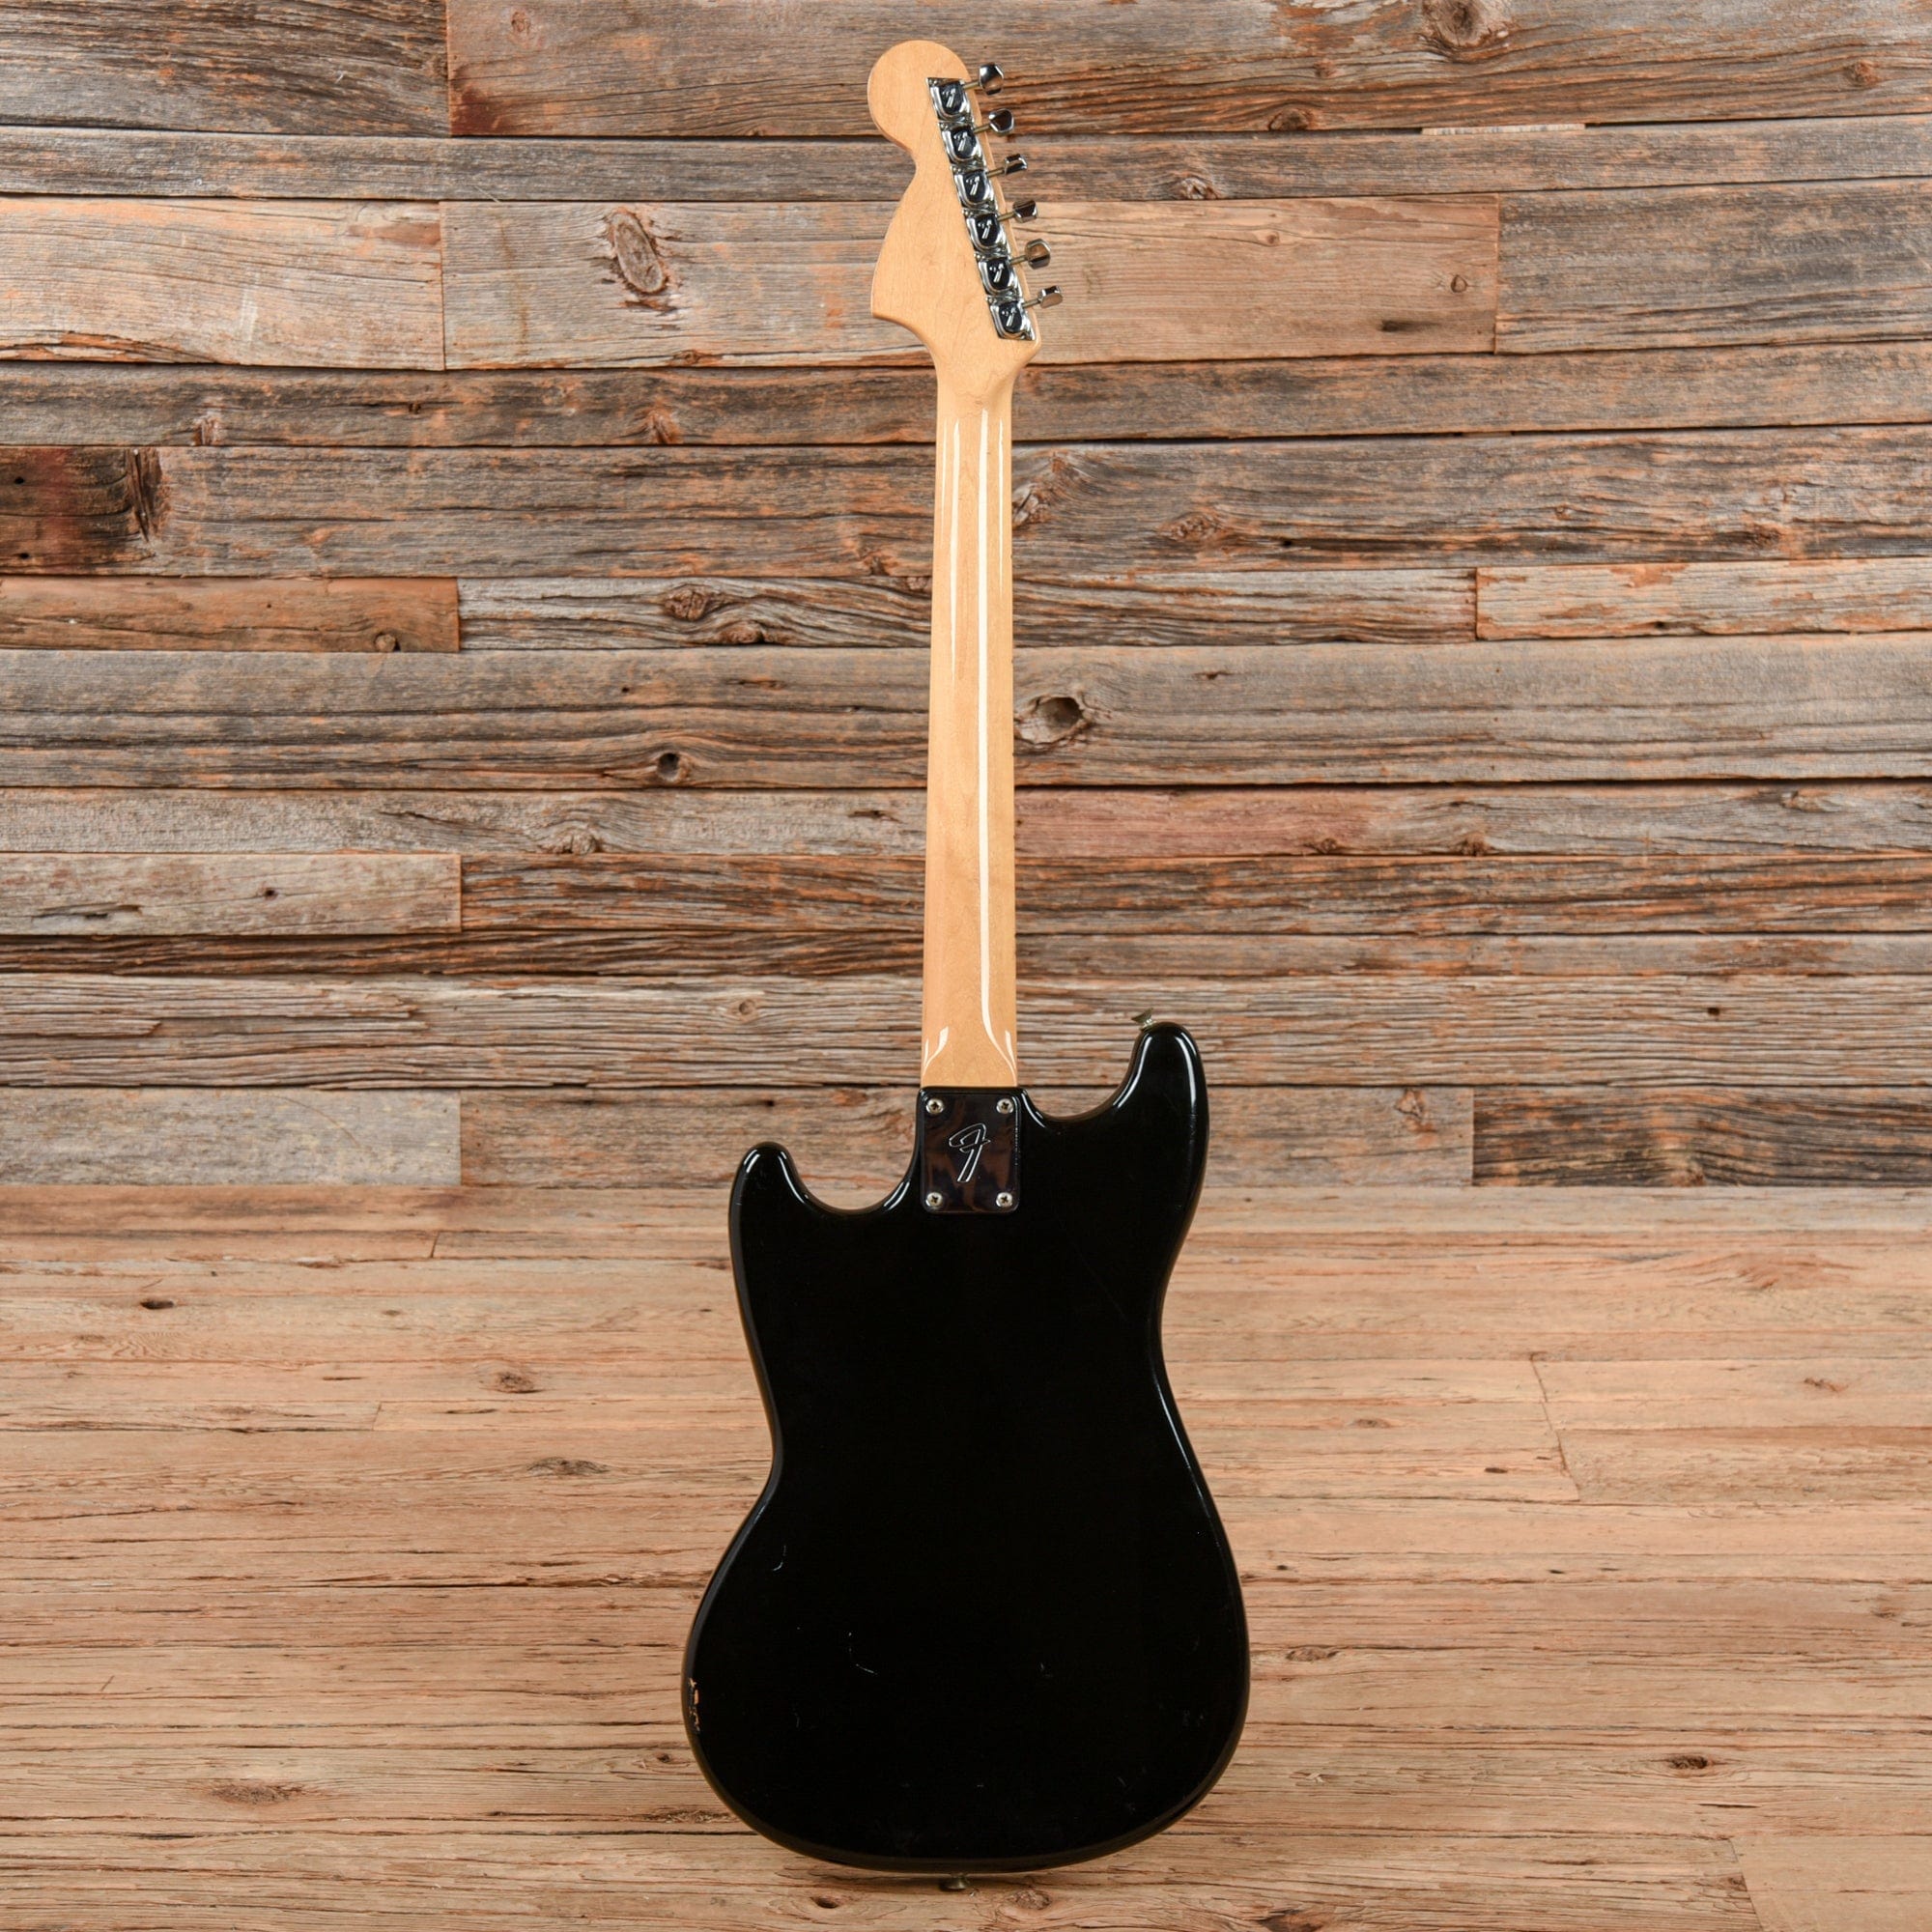 Fender Musicmaster Black 1980 Electric Guitars / Solid Body